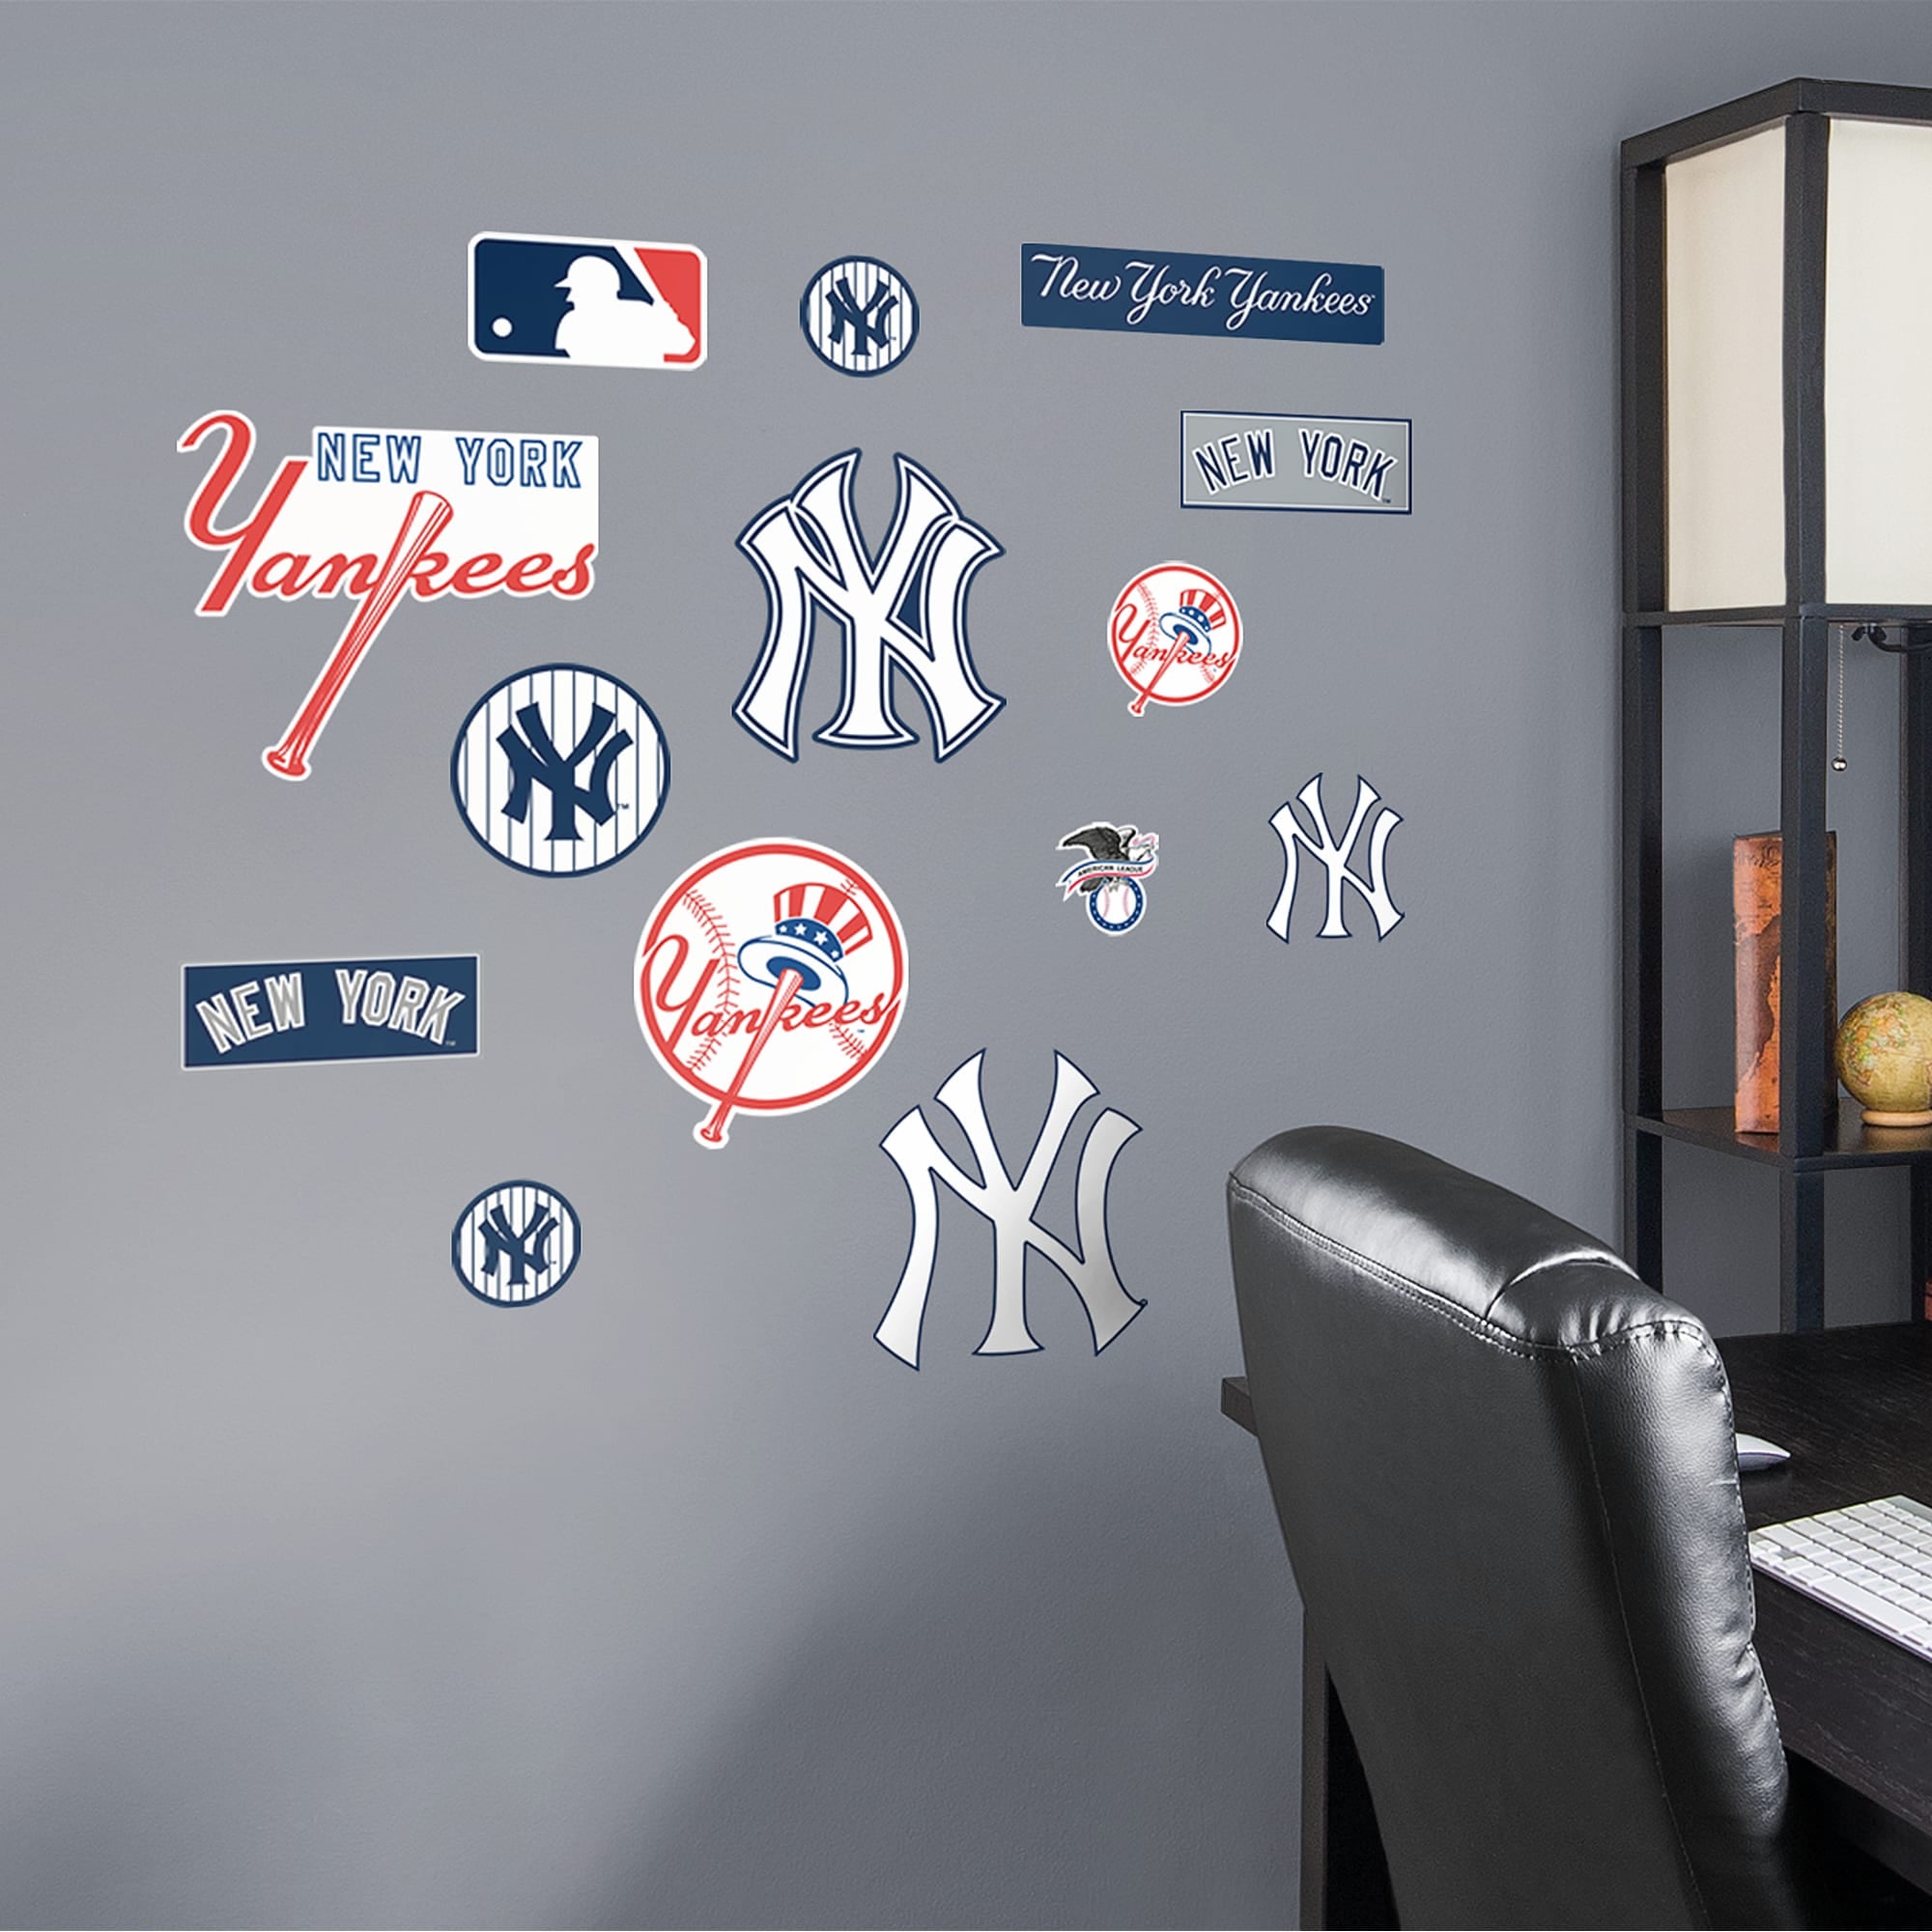 New York Yankees: Logo Assortment - Officially Licensed MLB Removable Wall Decals 75"W x 39.5"H by Fathead | Vinyl